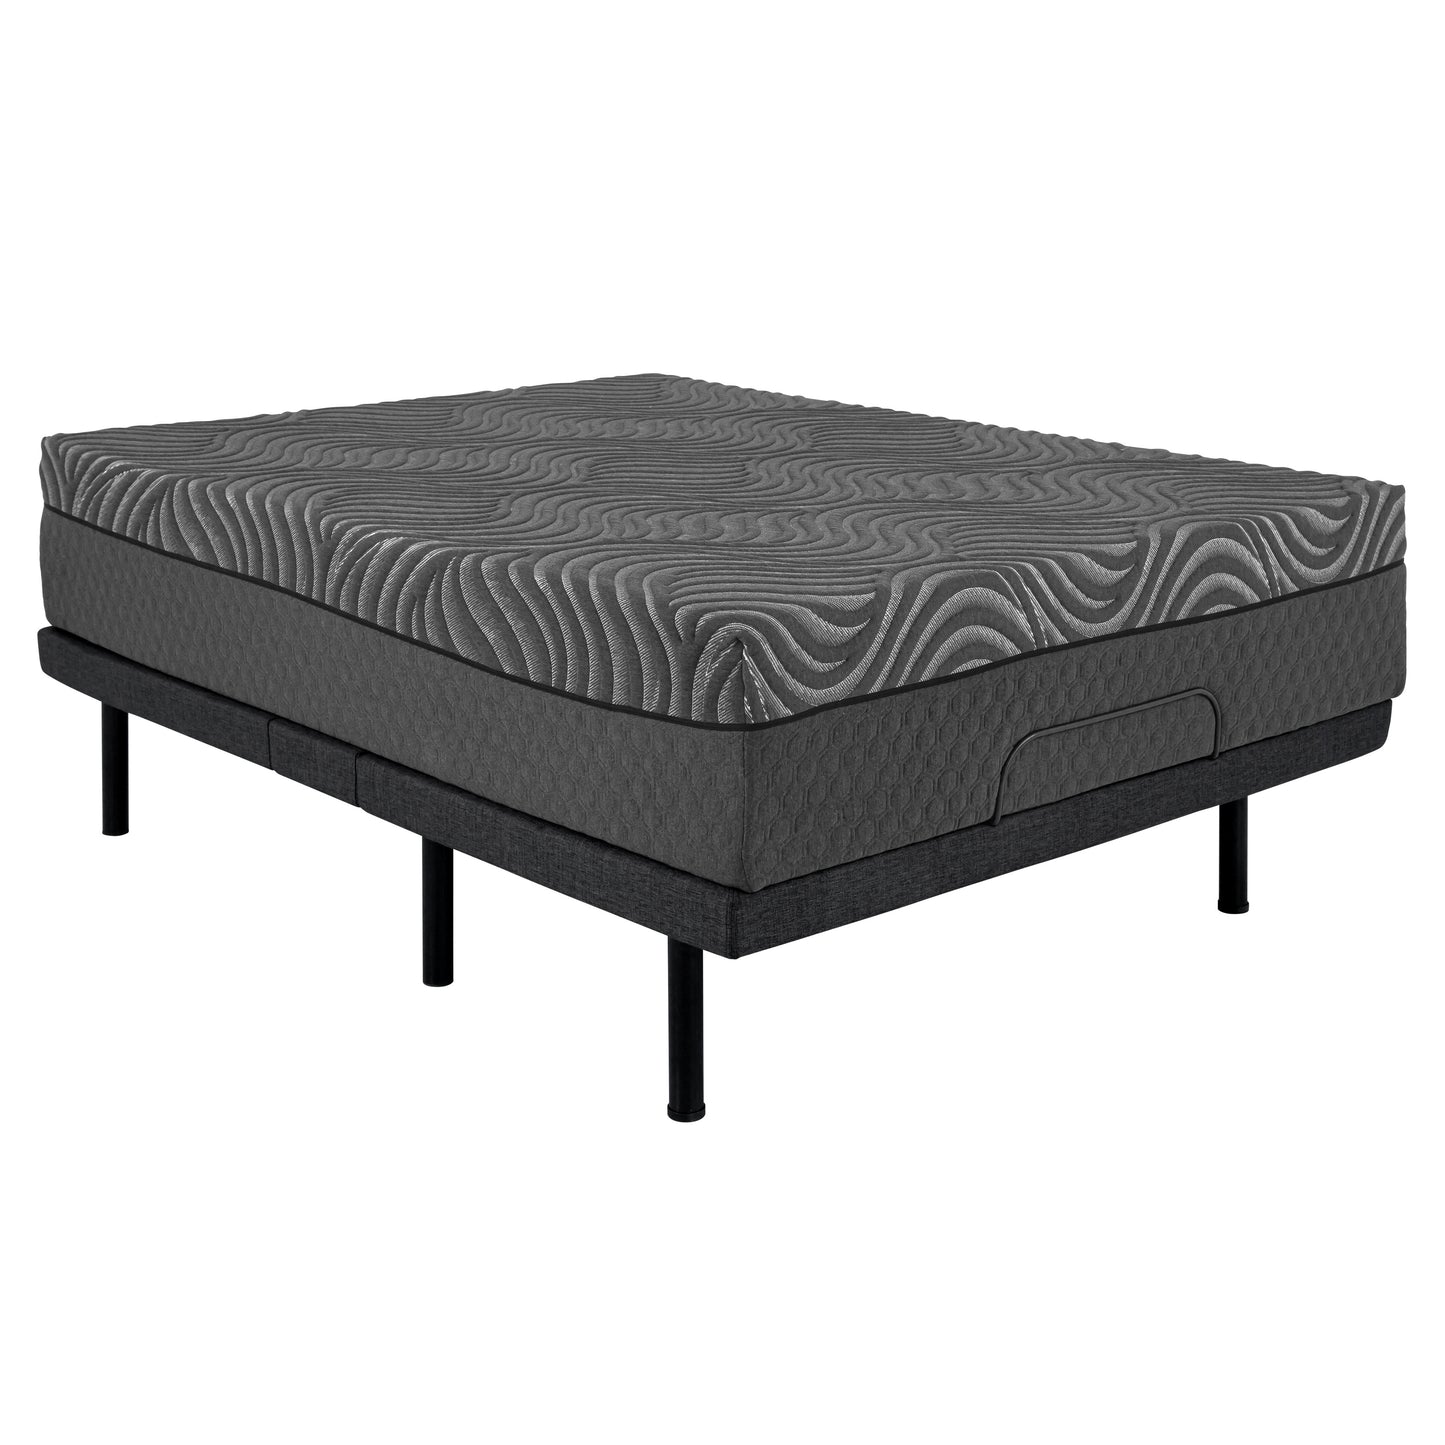 QUEEN 14'' Copper-Infused Memory Foam Hybrid-Taurus Collection